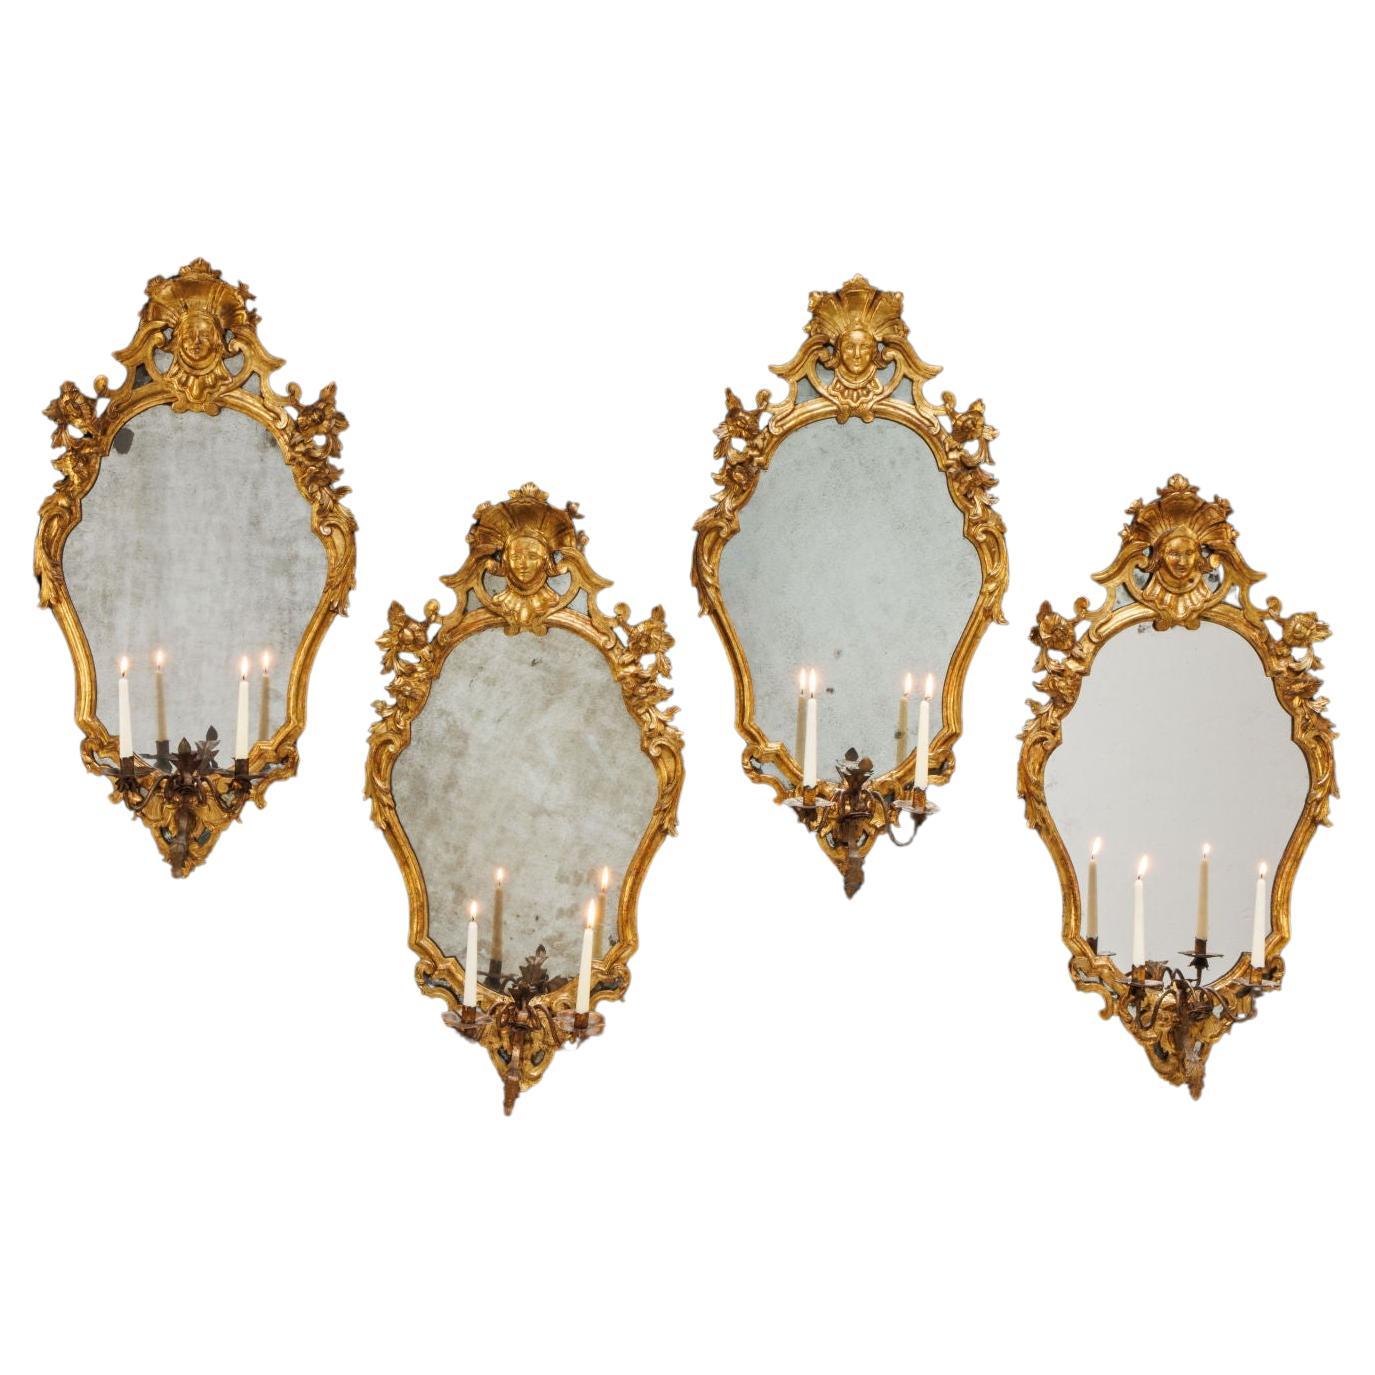 Group of four mirrors. Tuscany, first quarter of the 18th century